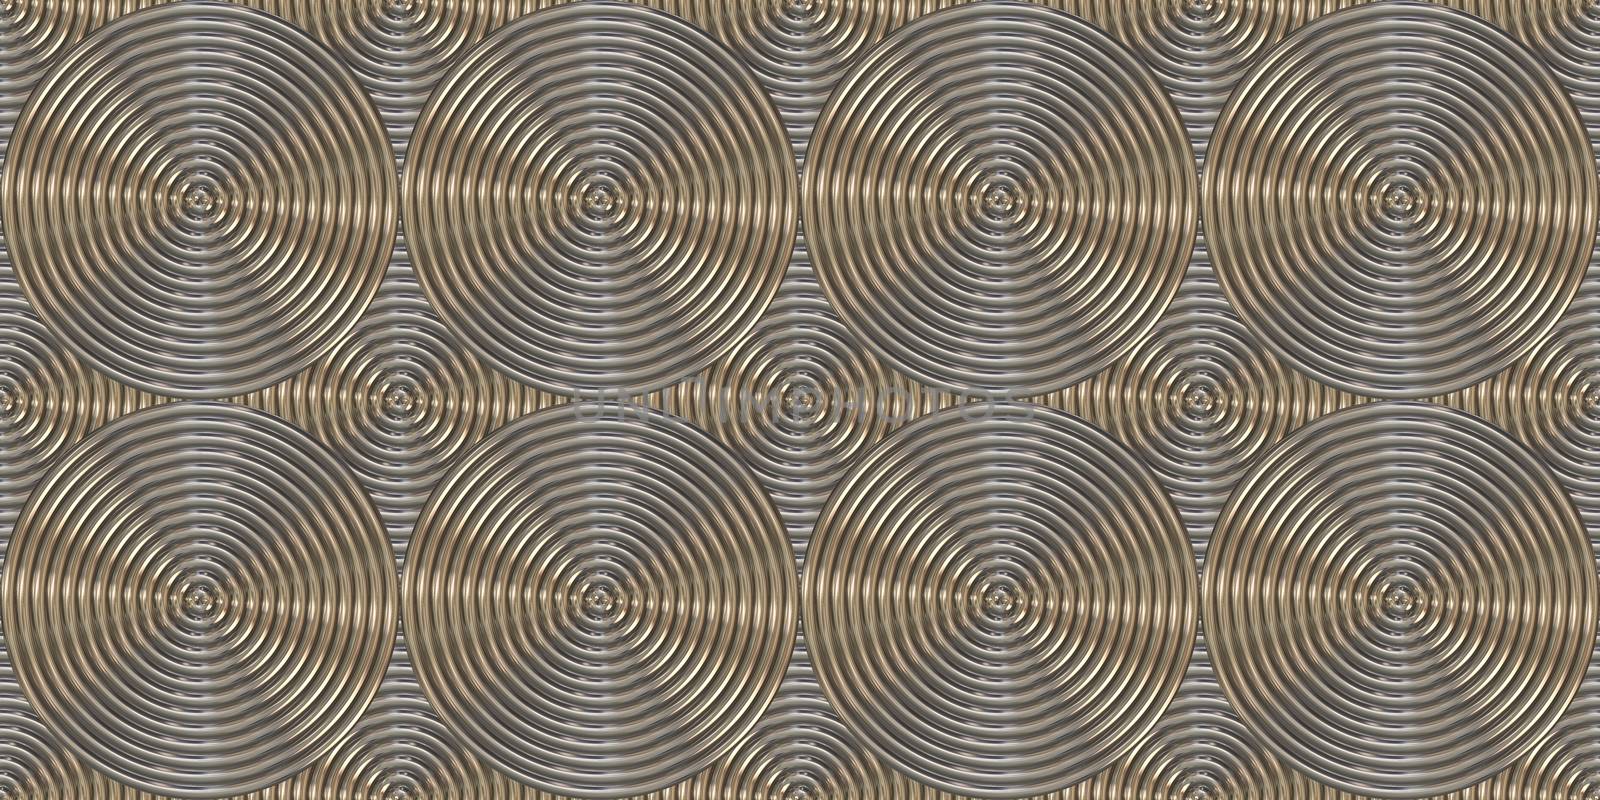 Vintage rings background. Gold silver art deco seamless texture. Metal circles pattern.